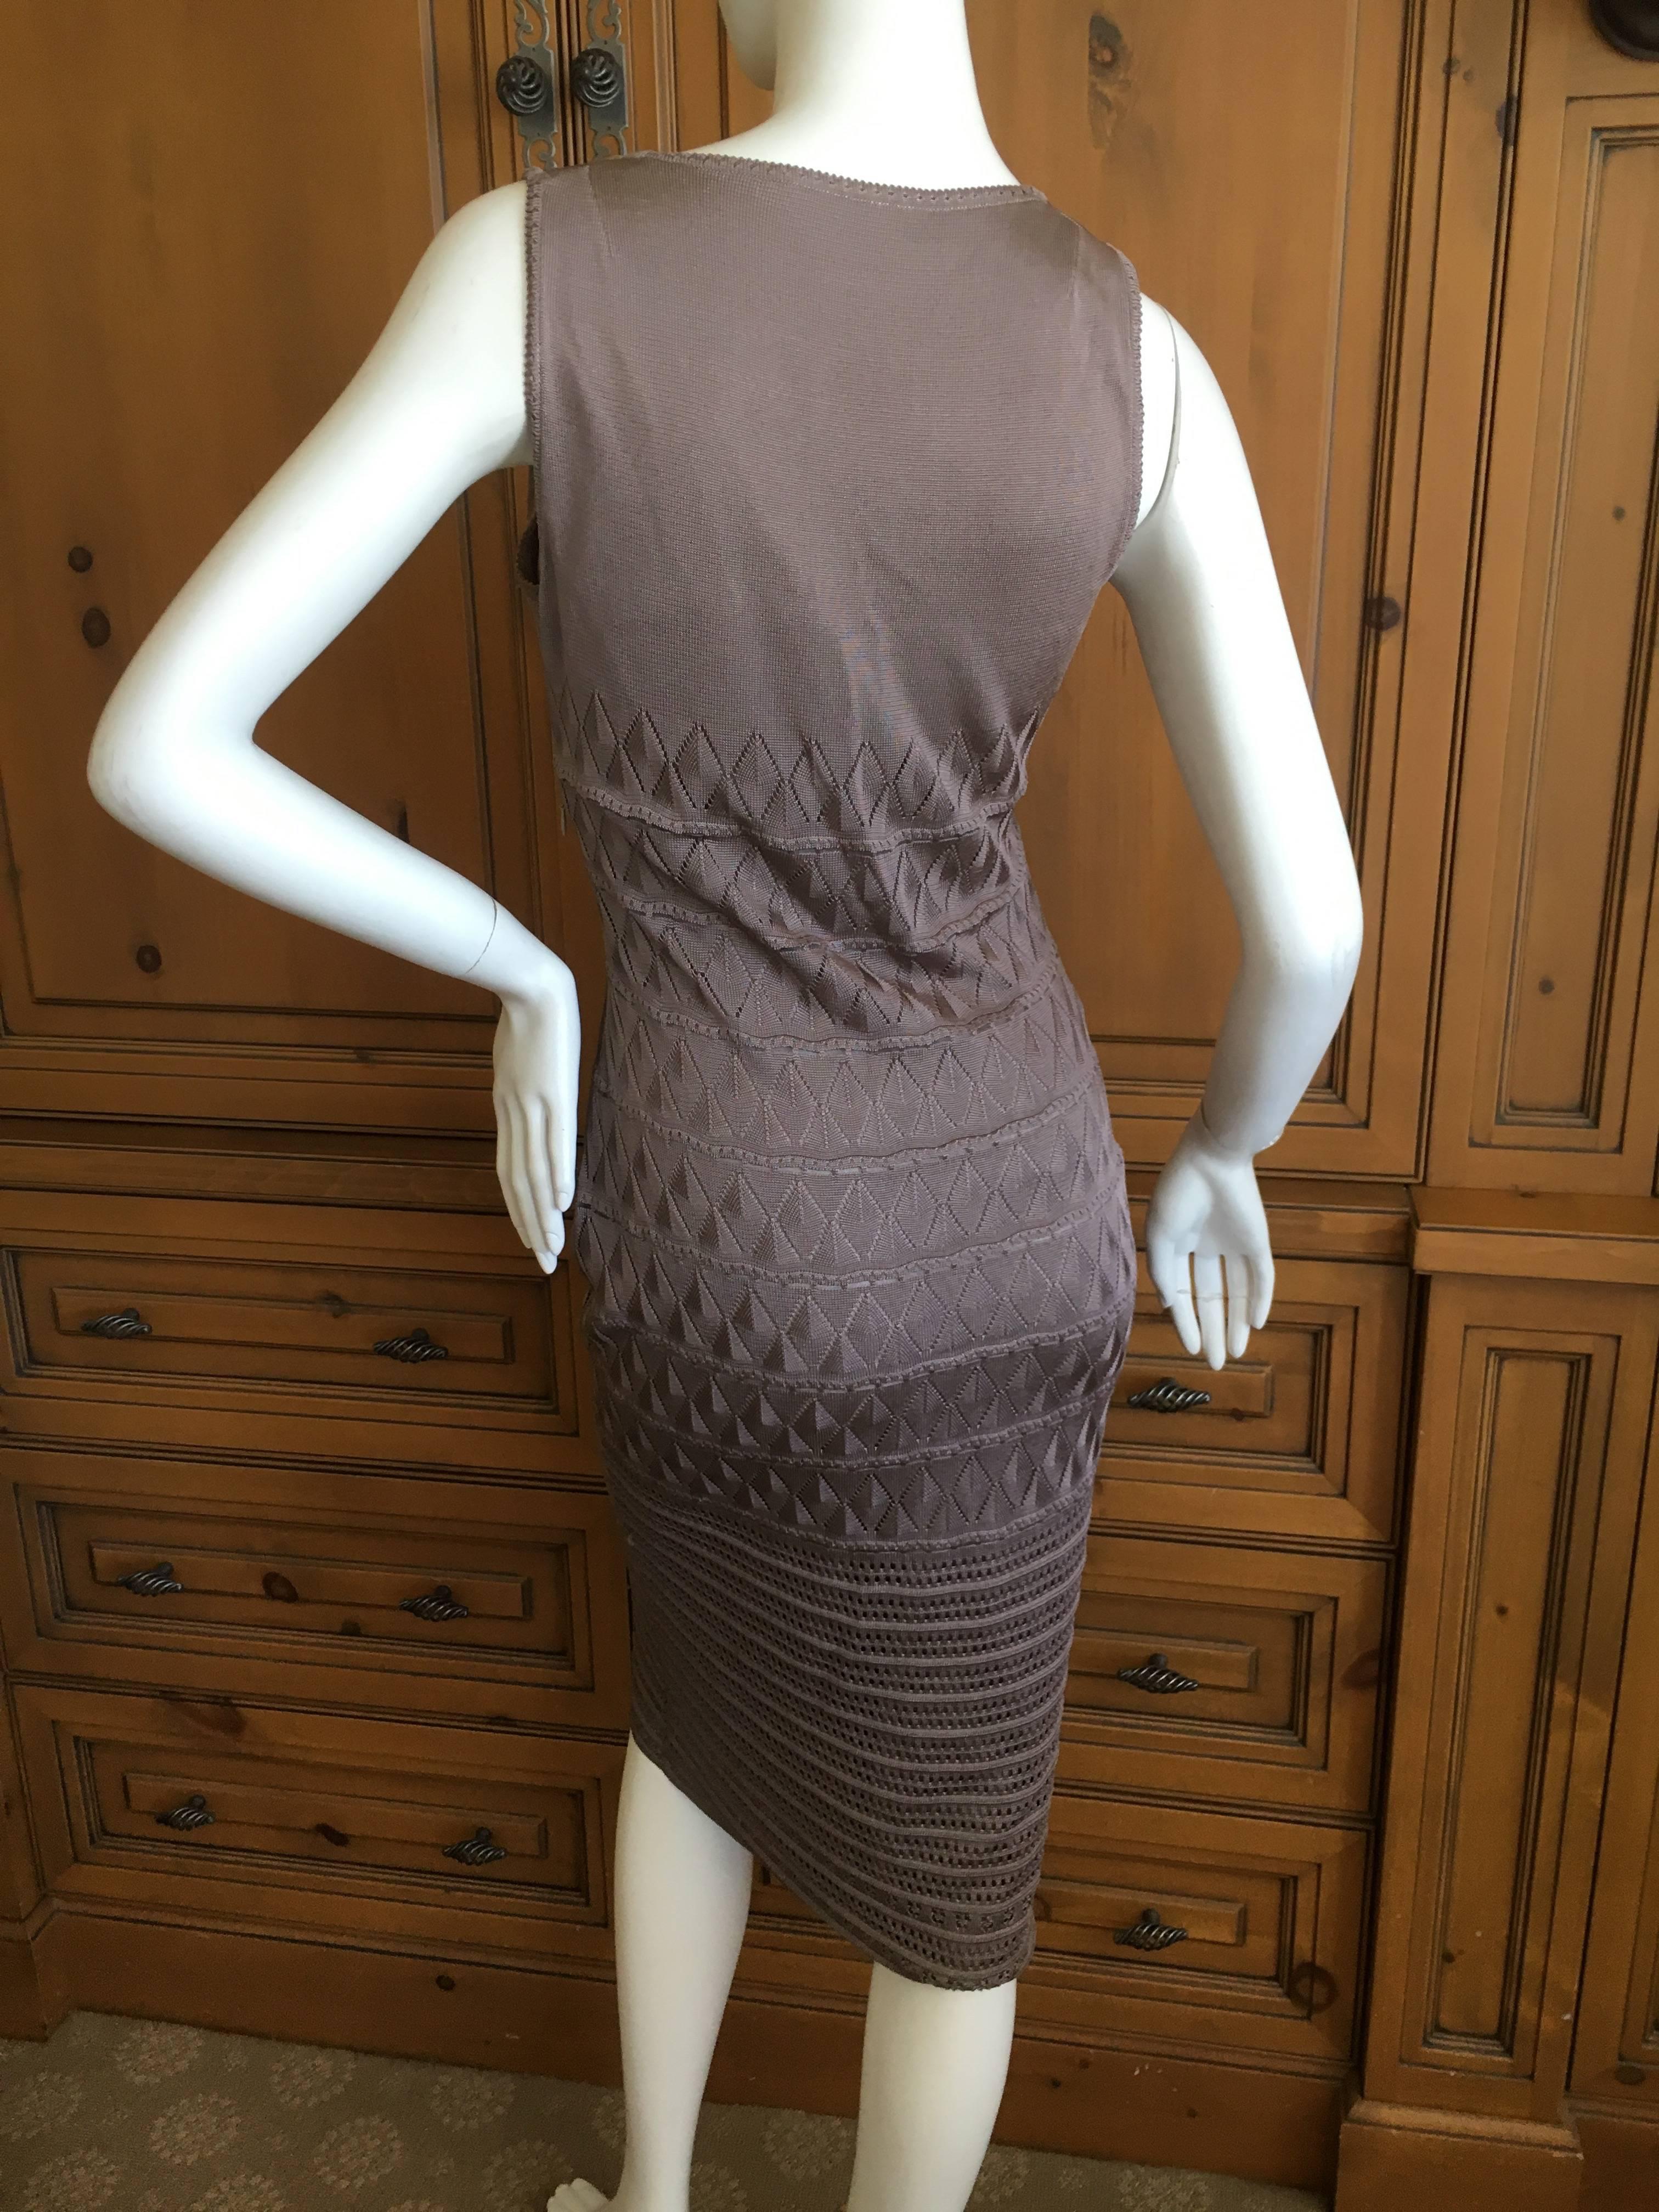 John Galliano f990's Gray Diamond Pattern Knit Dress with Matching Cardigan.
Sz M
Bust 36"
Waist 28"
Hips 38"
Length 44"
Great pre owned condition